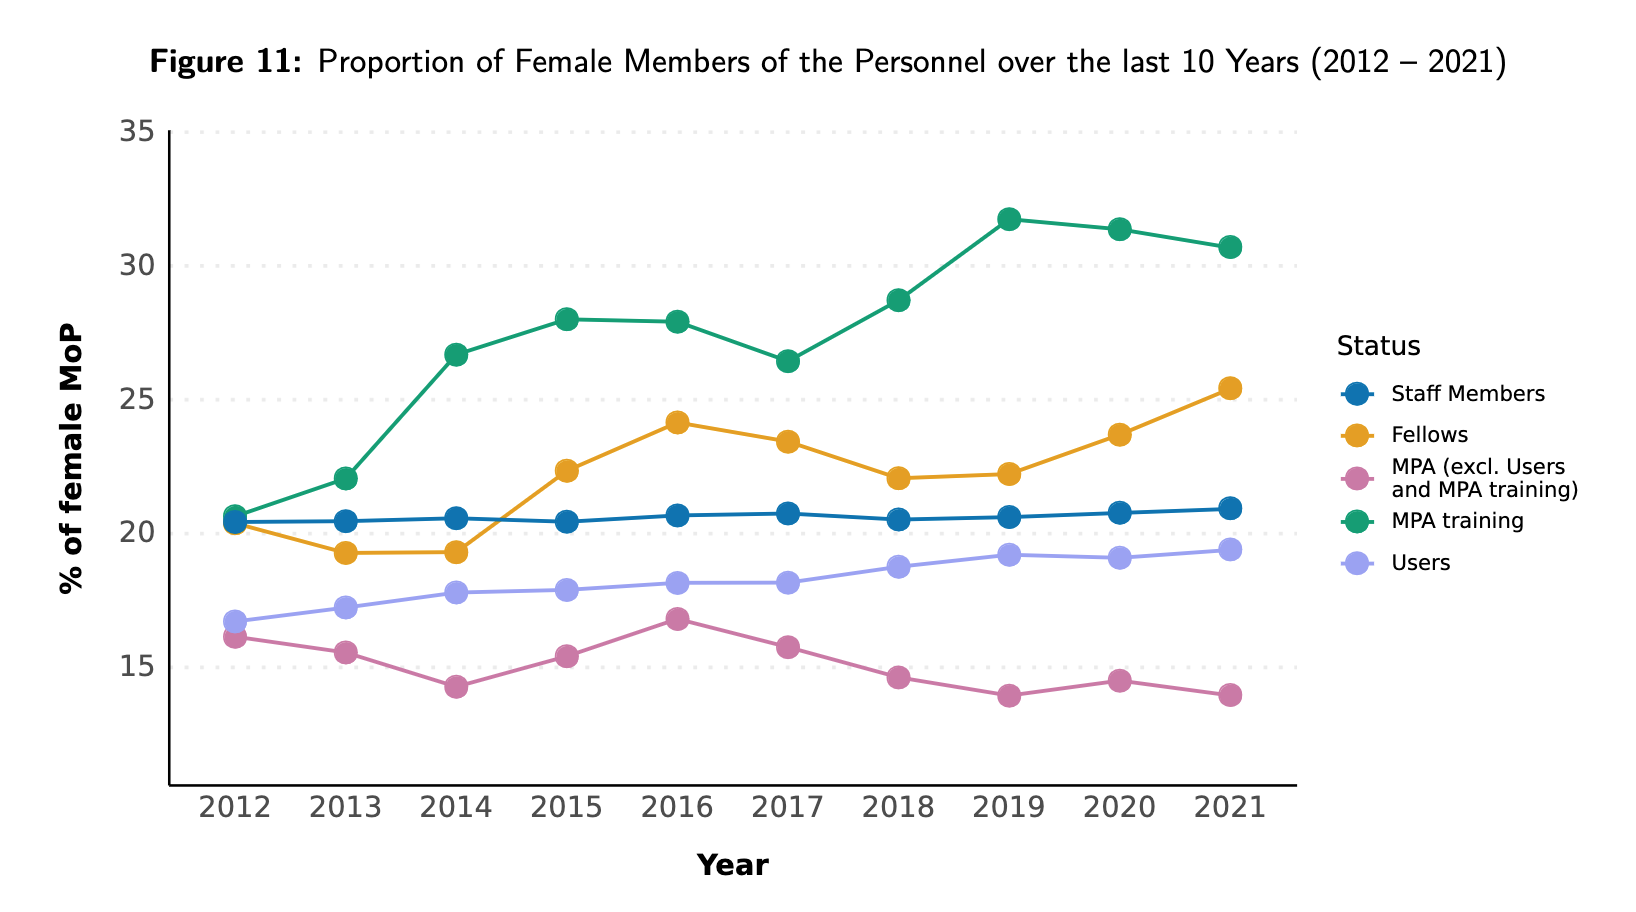 Proportion of female staff